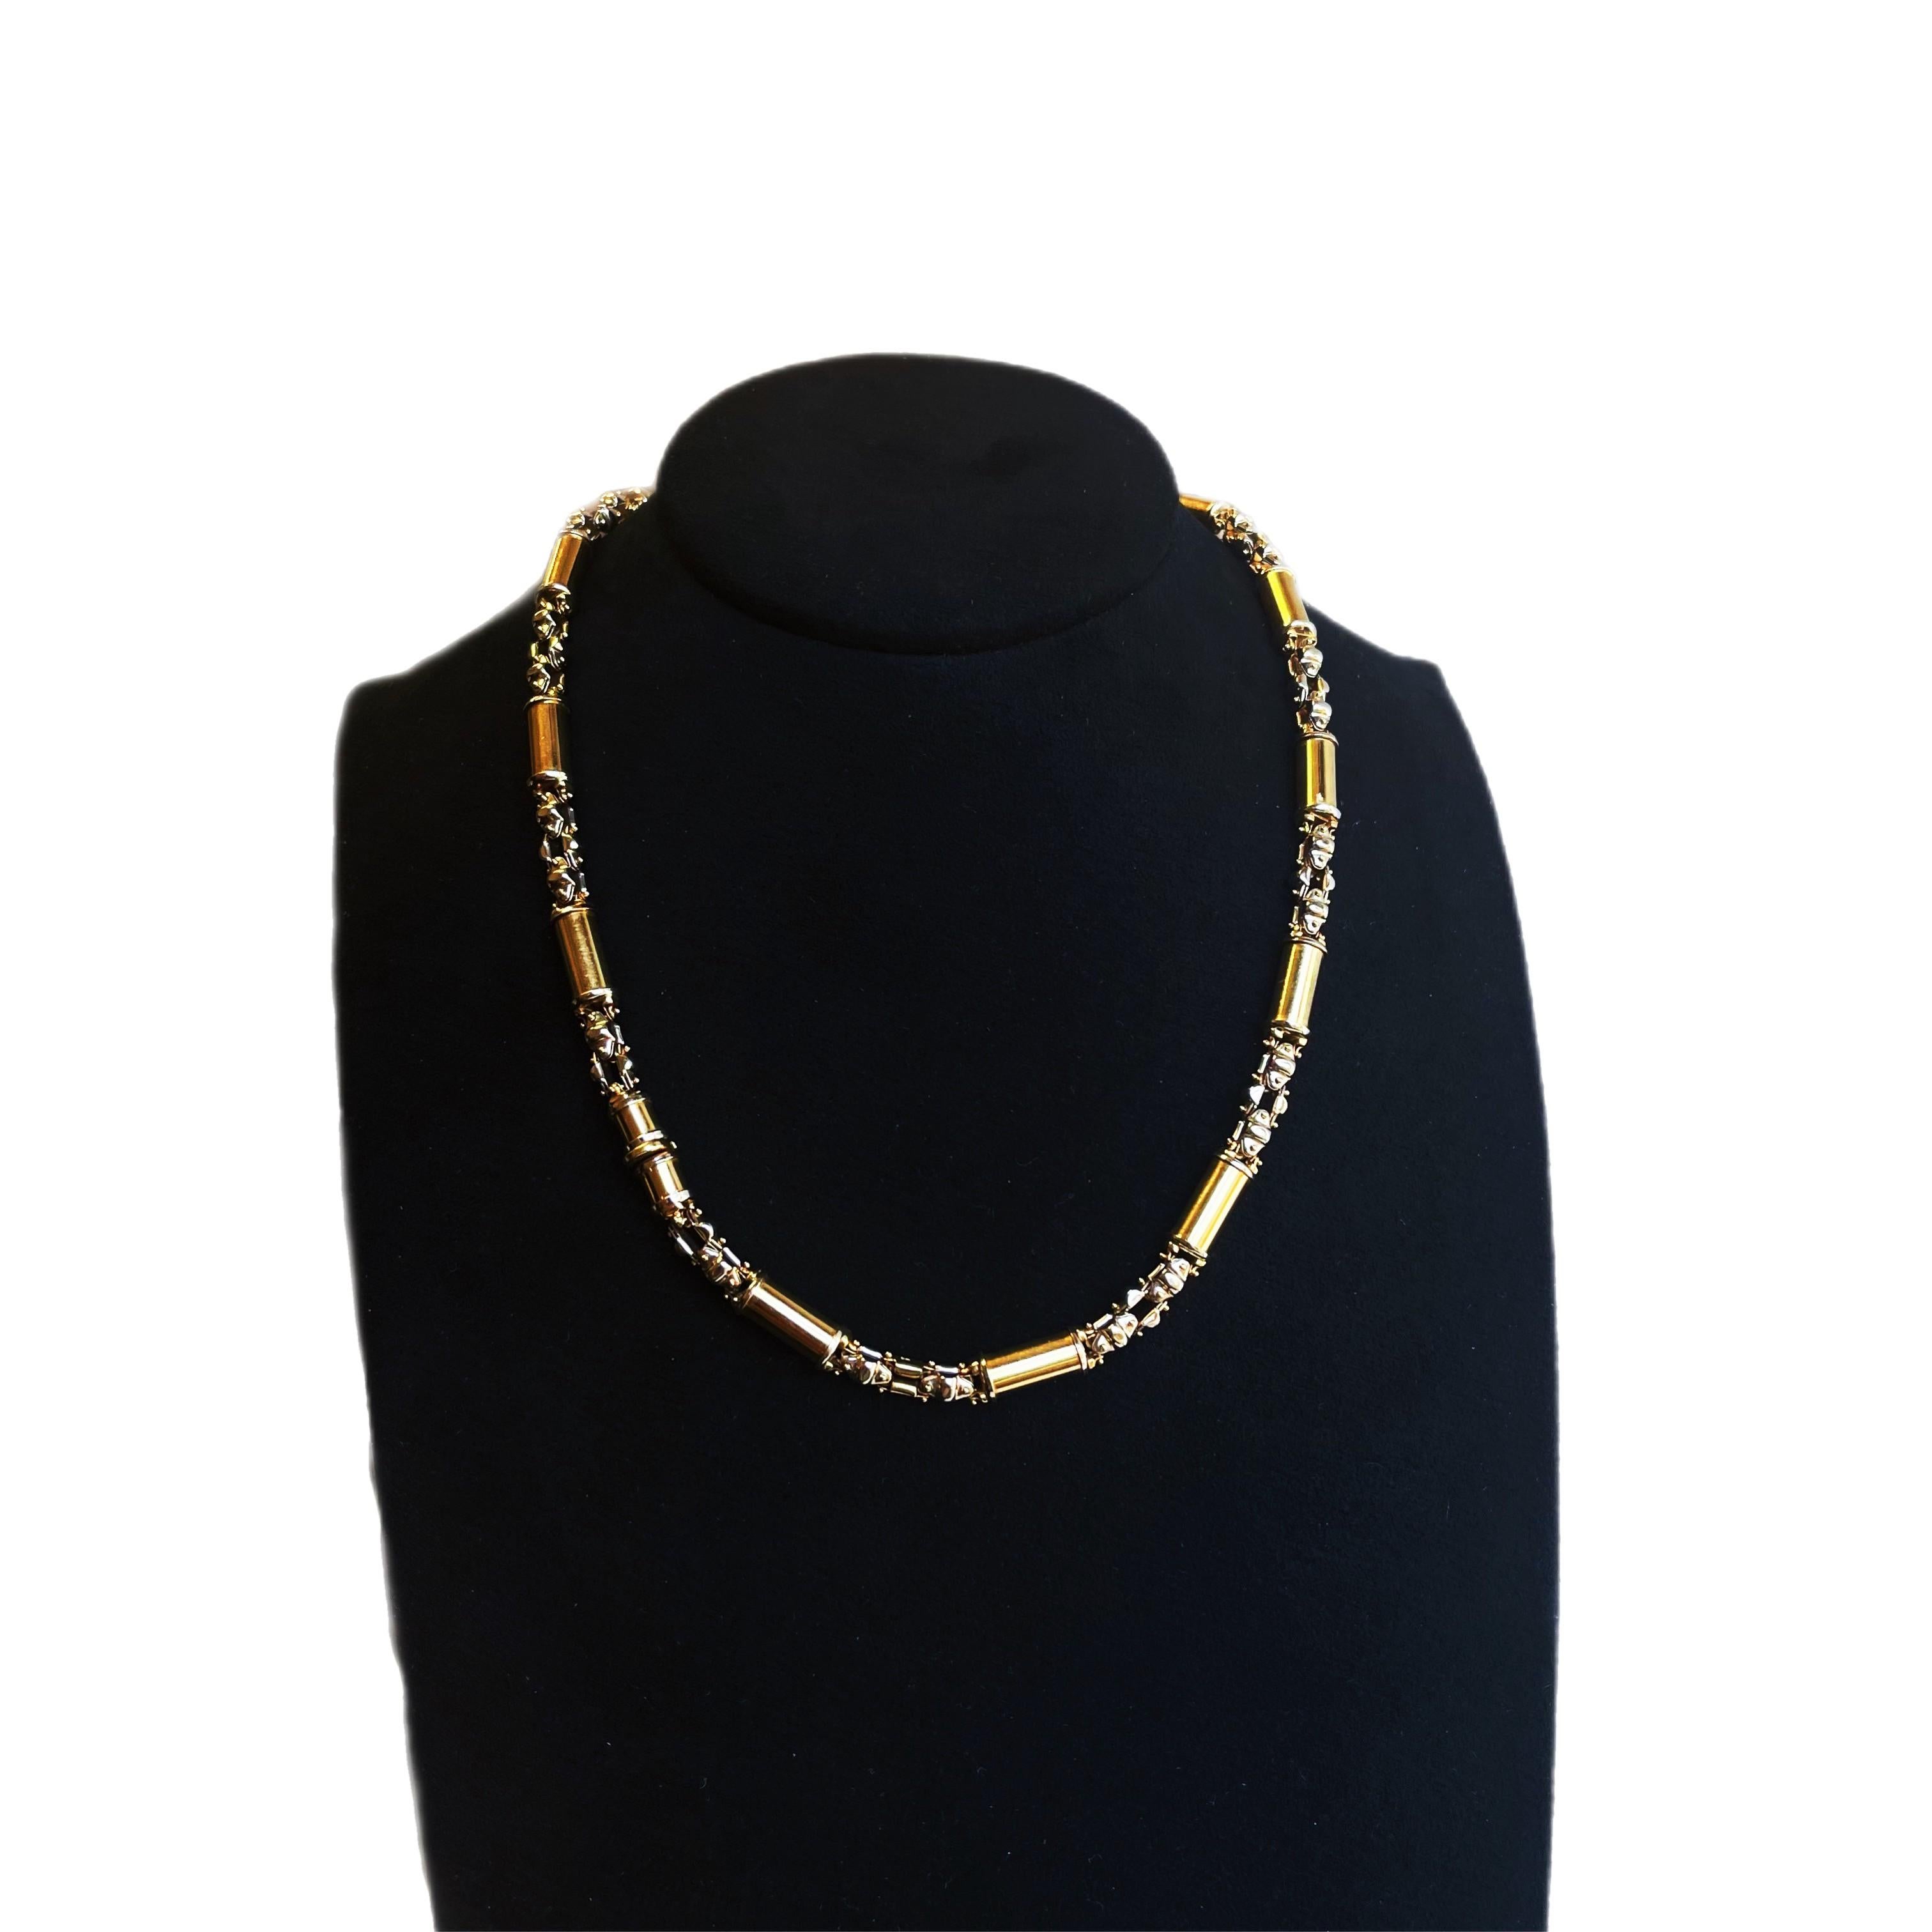 Issac Nussbaum 18k Yellow Gold Necklace and Bracelet In New Condition For Sale In New York, NY